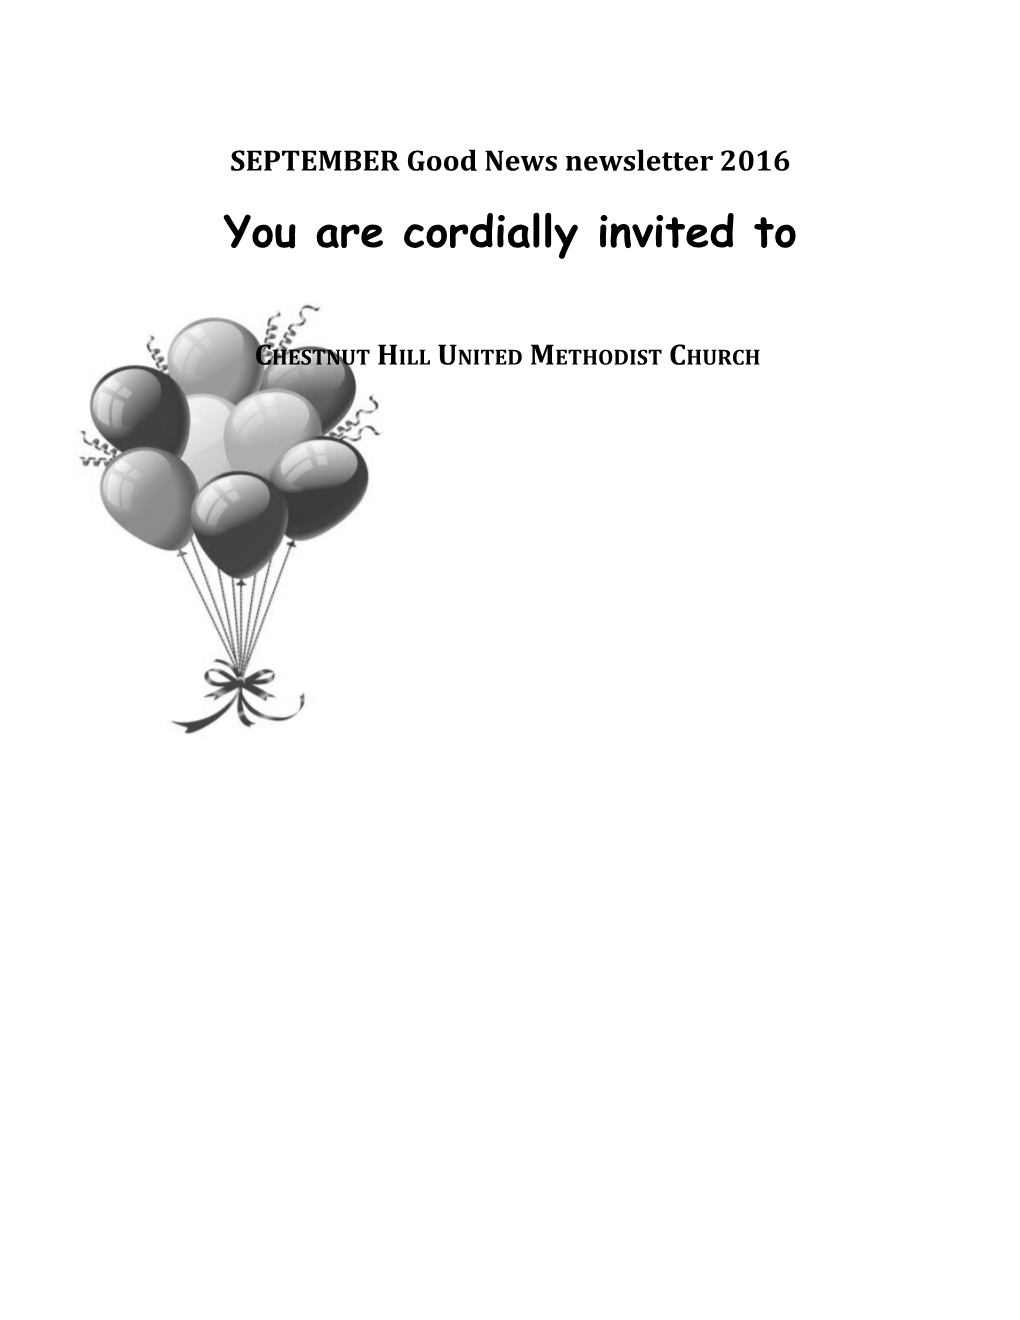 You Are Cordially Invited To